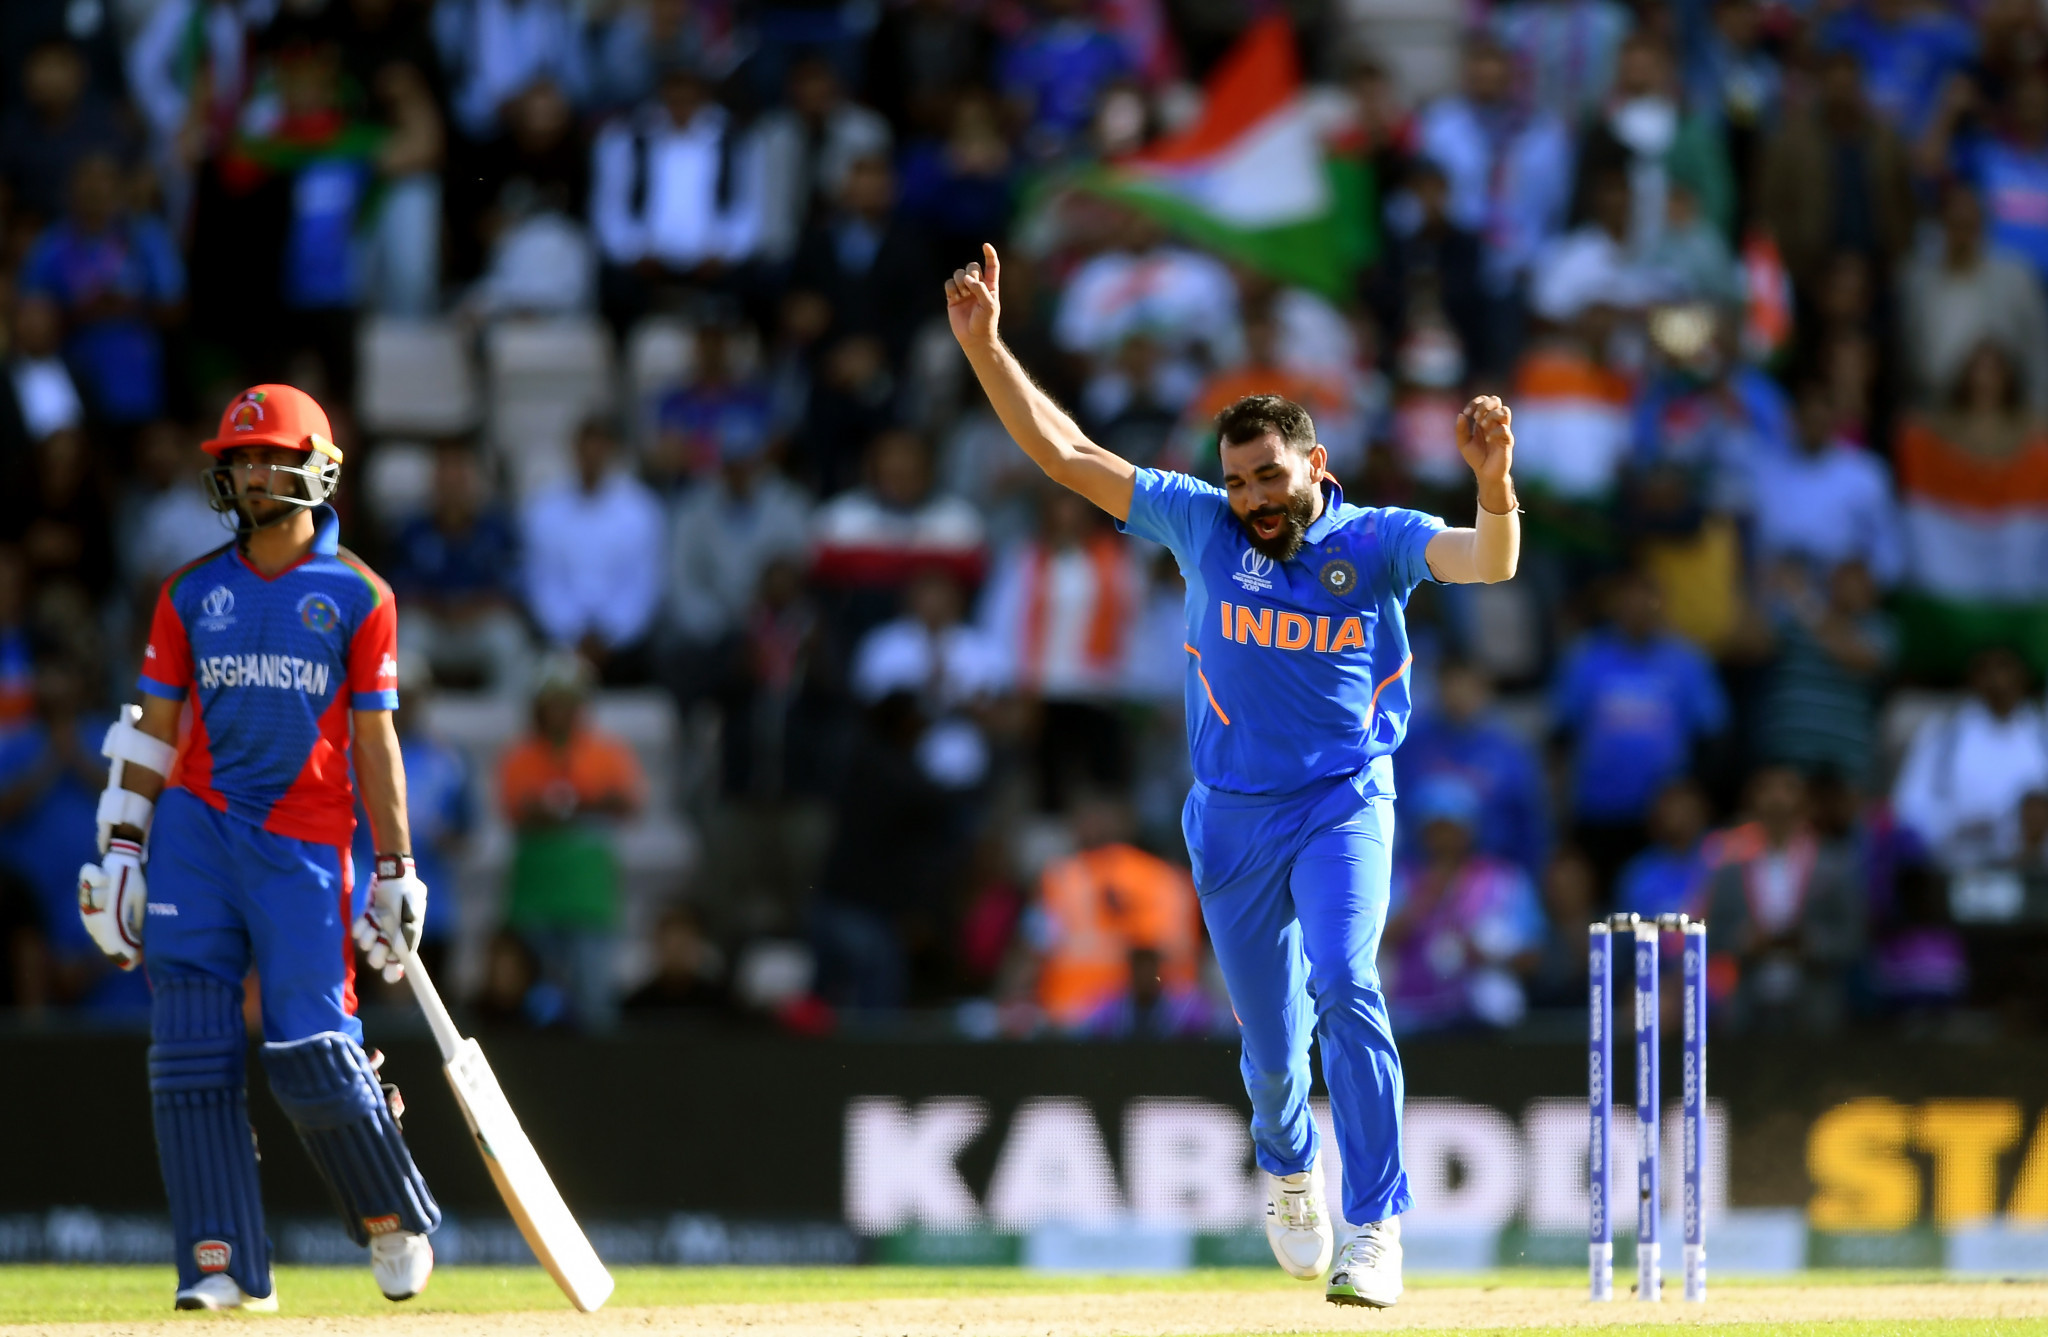 India's Mohammed Shami took a hat-trick in the final over to deny Afghanistan at the Cricket World Cup ©Getty Images